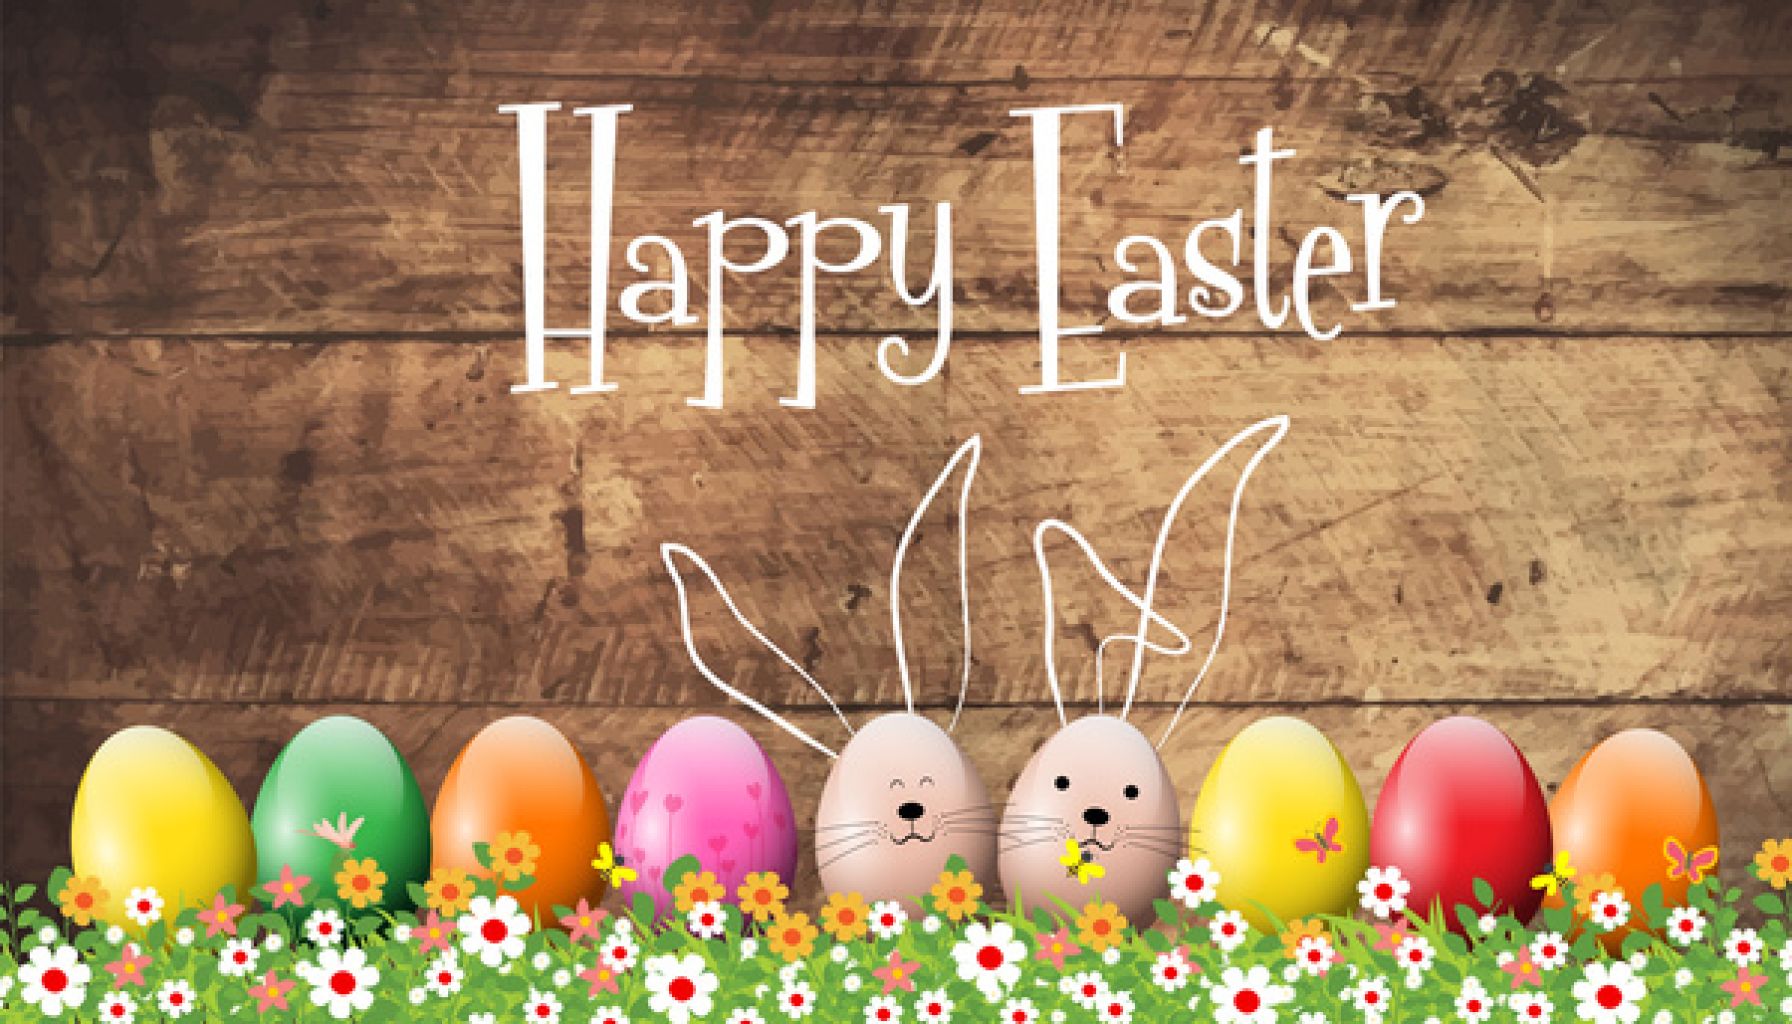 happy_easter_card_vector_design_with_colorful_eggs_6826143.jpg